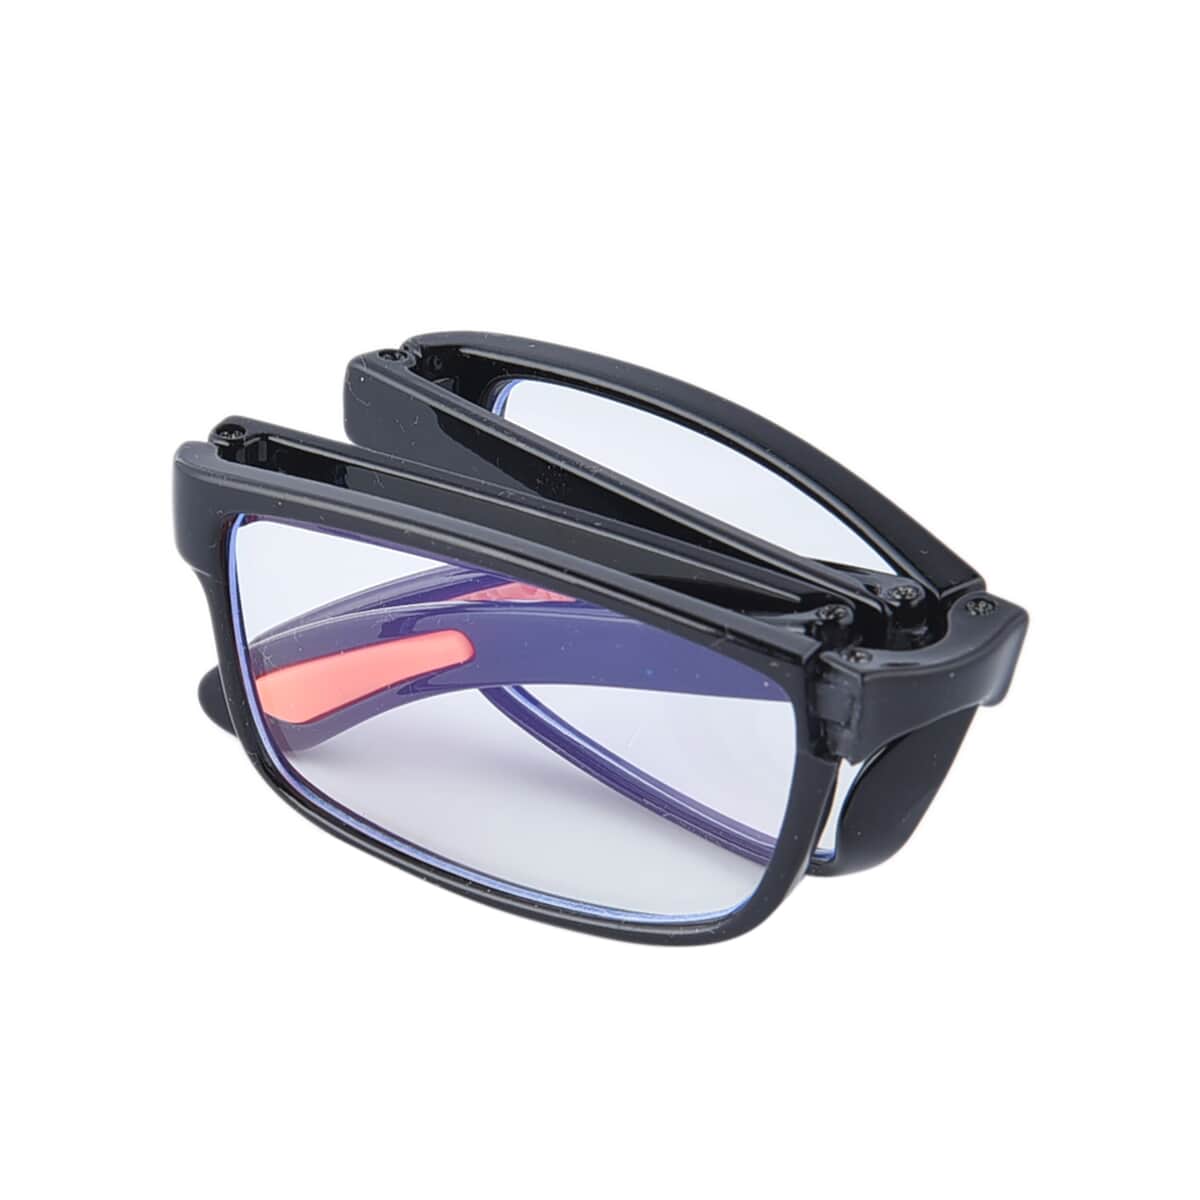 Foldable Anti-Blue Light Glasses with Testing kit - Black & Faux Leather image number 5